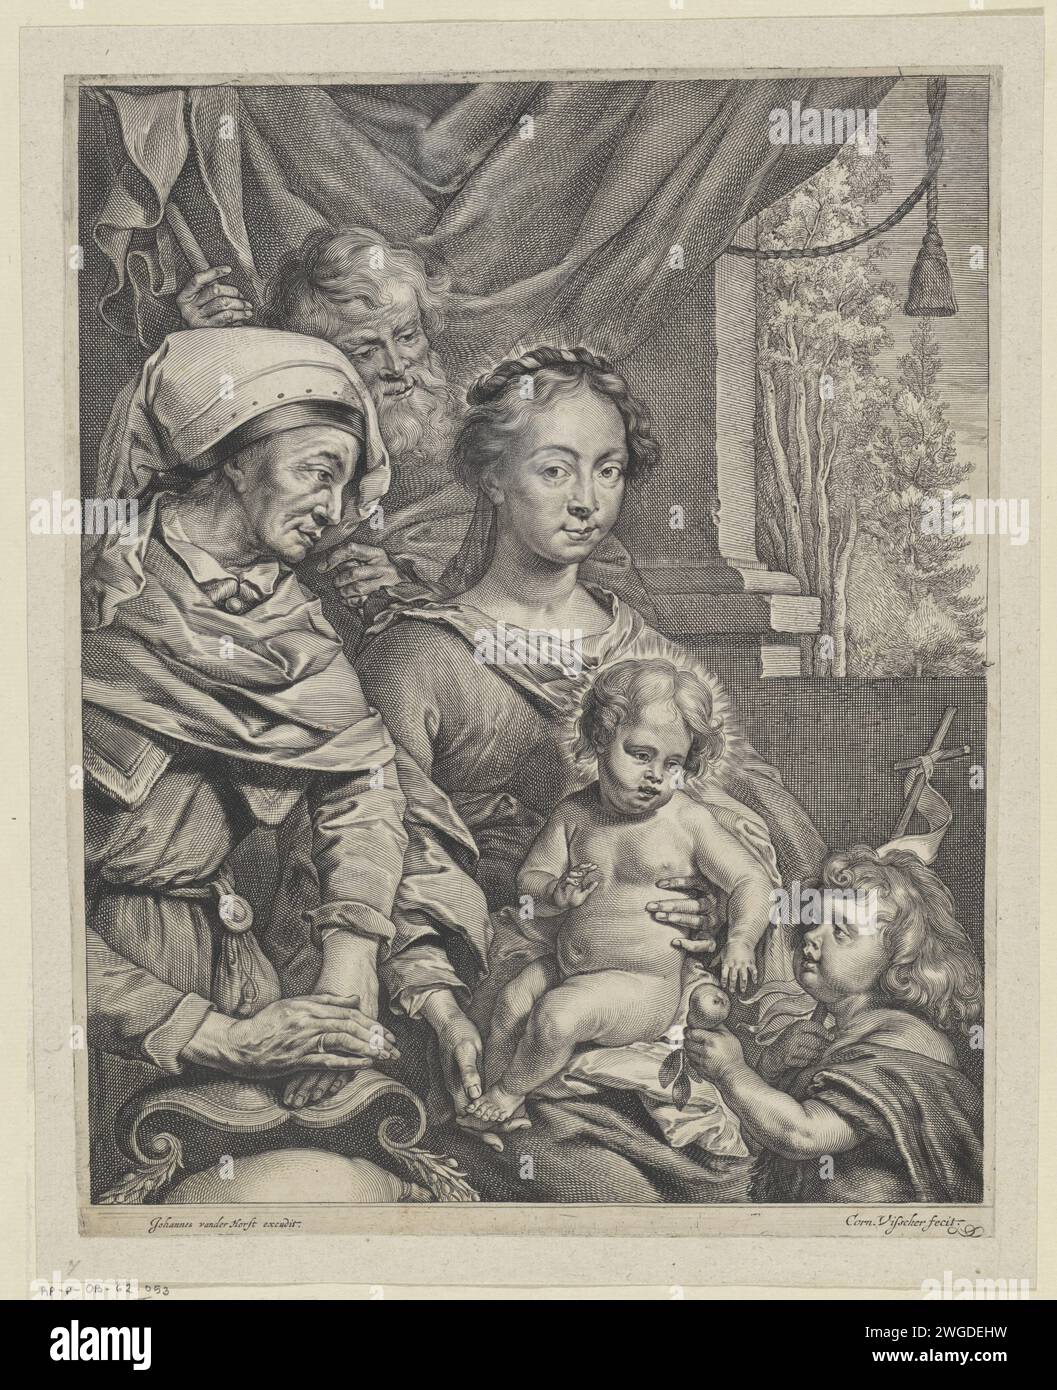 Holy family with Elisabet and Johannes, Cornelis Visscher (II), After Jacopo Palma (Il Vecchio), 1638 - 1658 print The Holy Family with Elisabet and John the Baptist as a child. John, with a banner in his hand, stands for the Christ child and offers him a pear. Haarlem paper engraving / etching Holy Family with John the Baptist (as child). fruits: pear Stock Photo